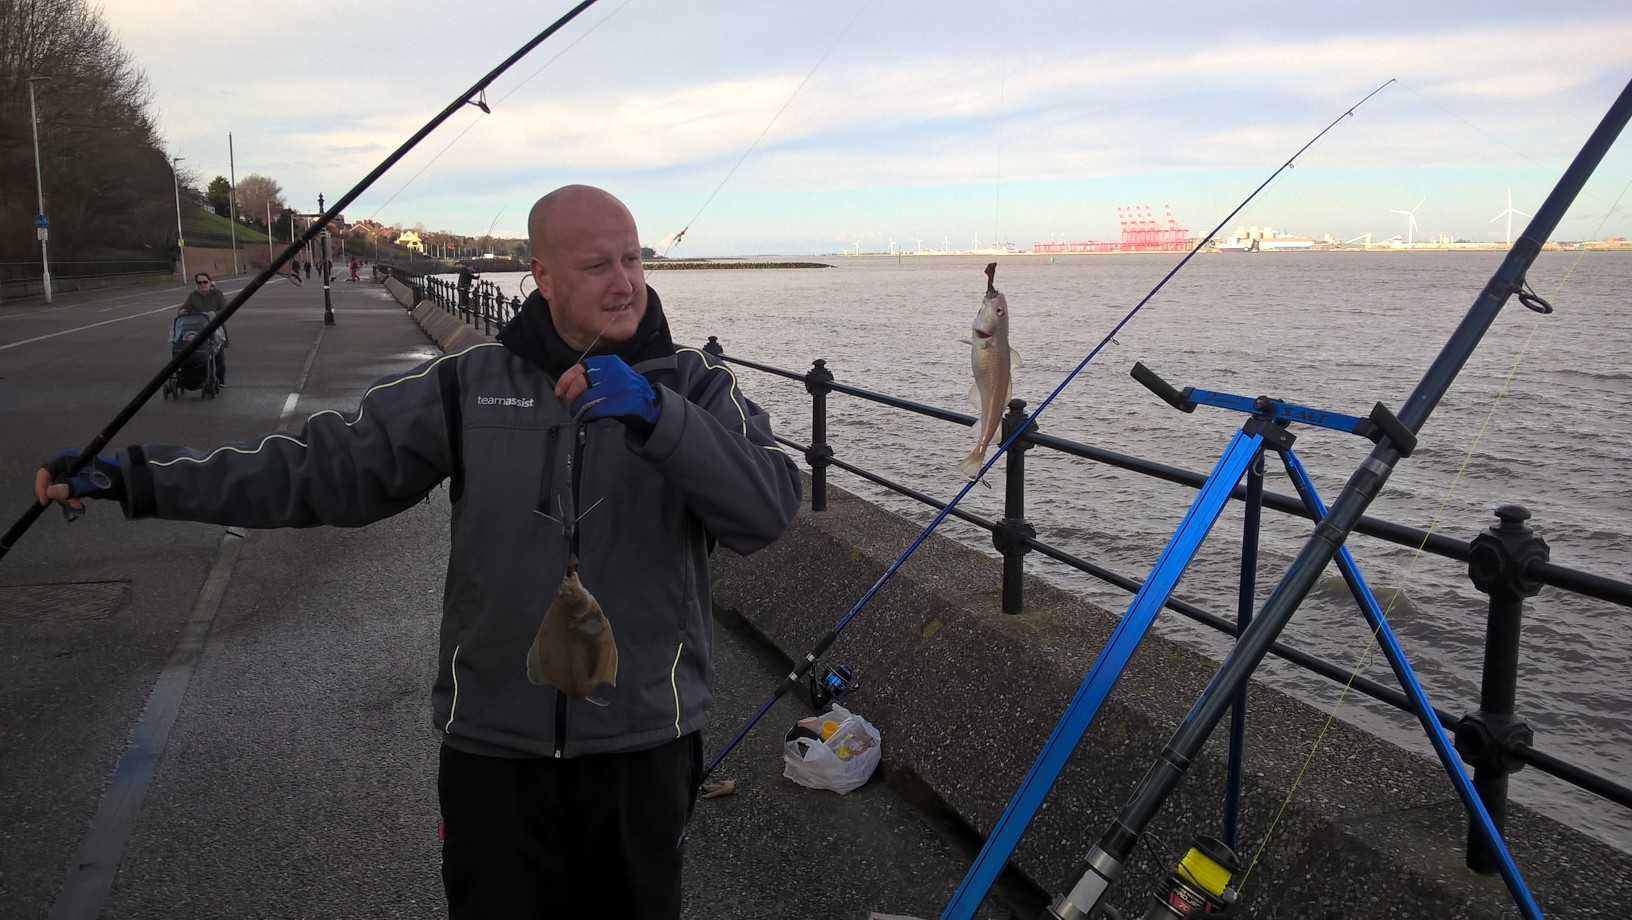 A picture of myself with two fish I just caught from the river mersey